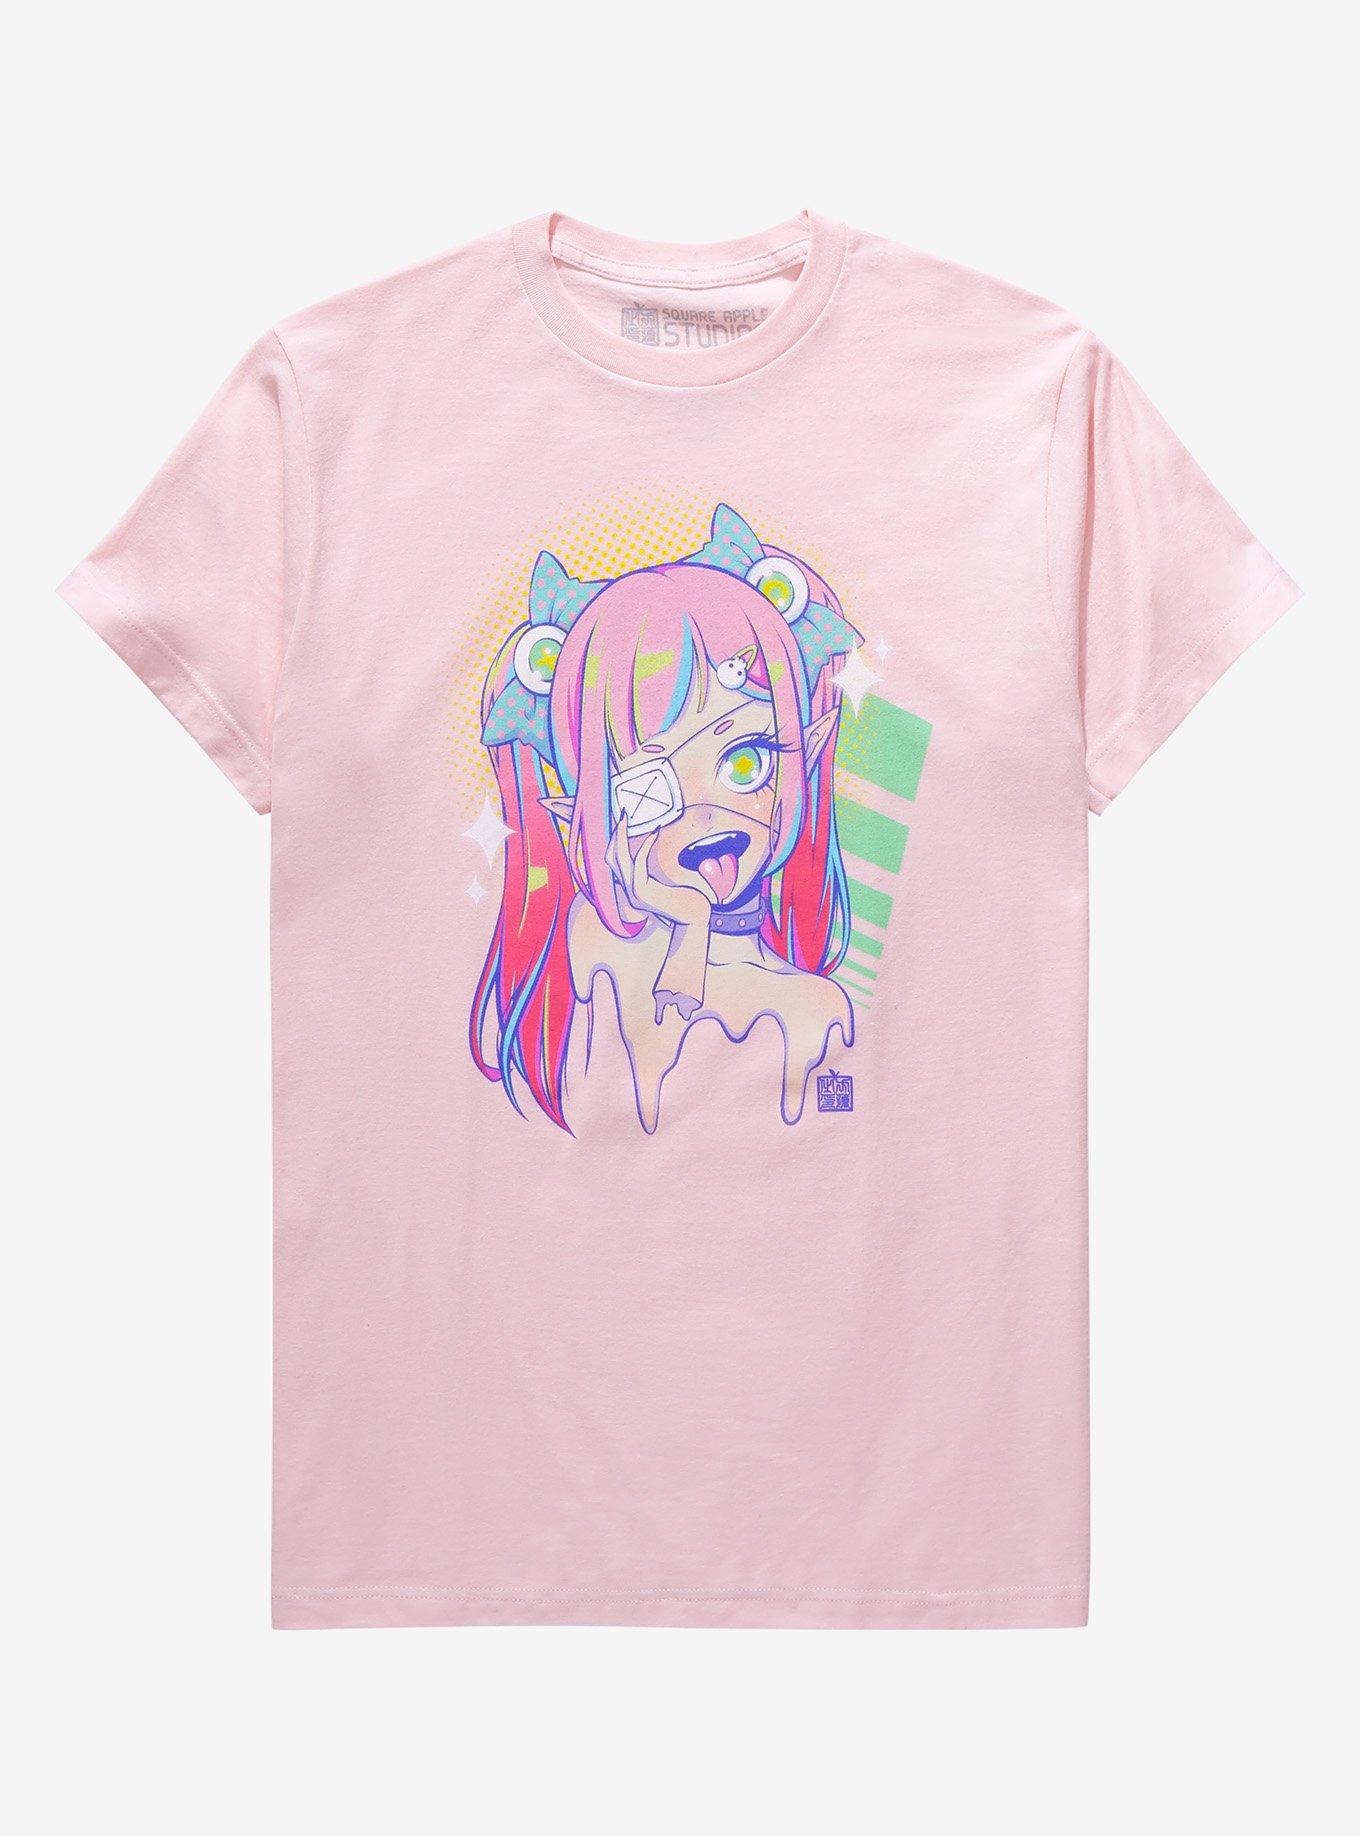 Pink Monster Girl T-Shirt By Square Apple Studios, PINK, hi-res